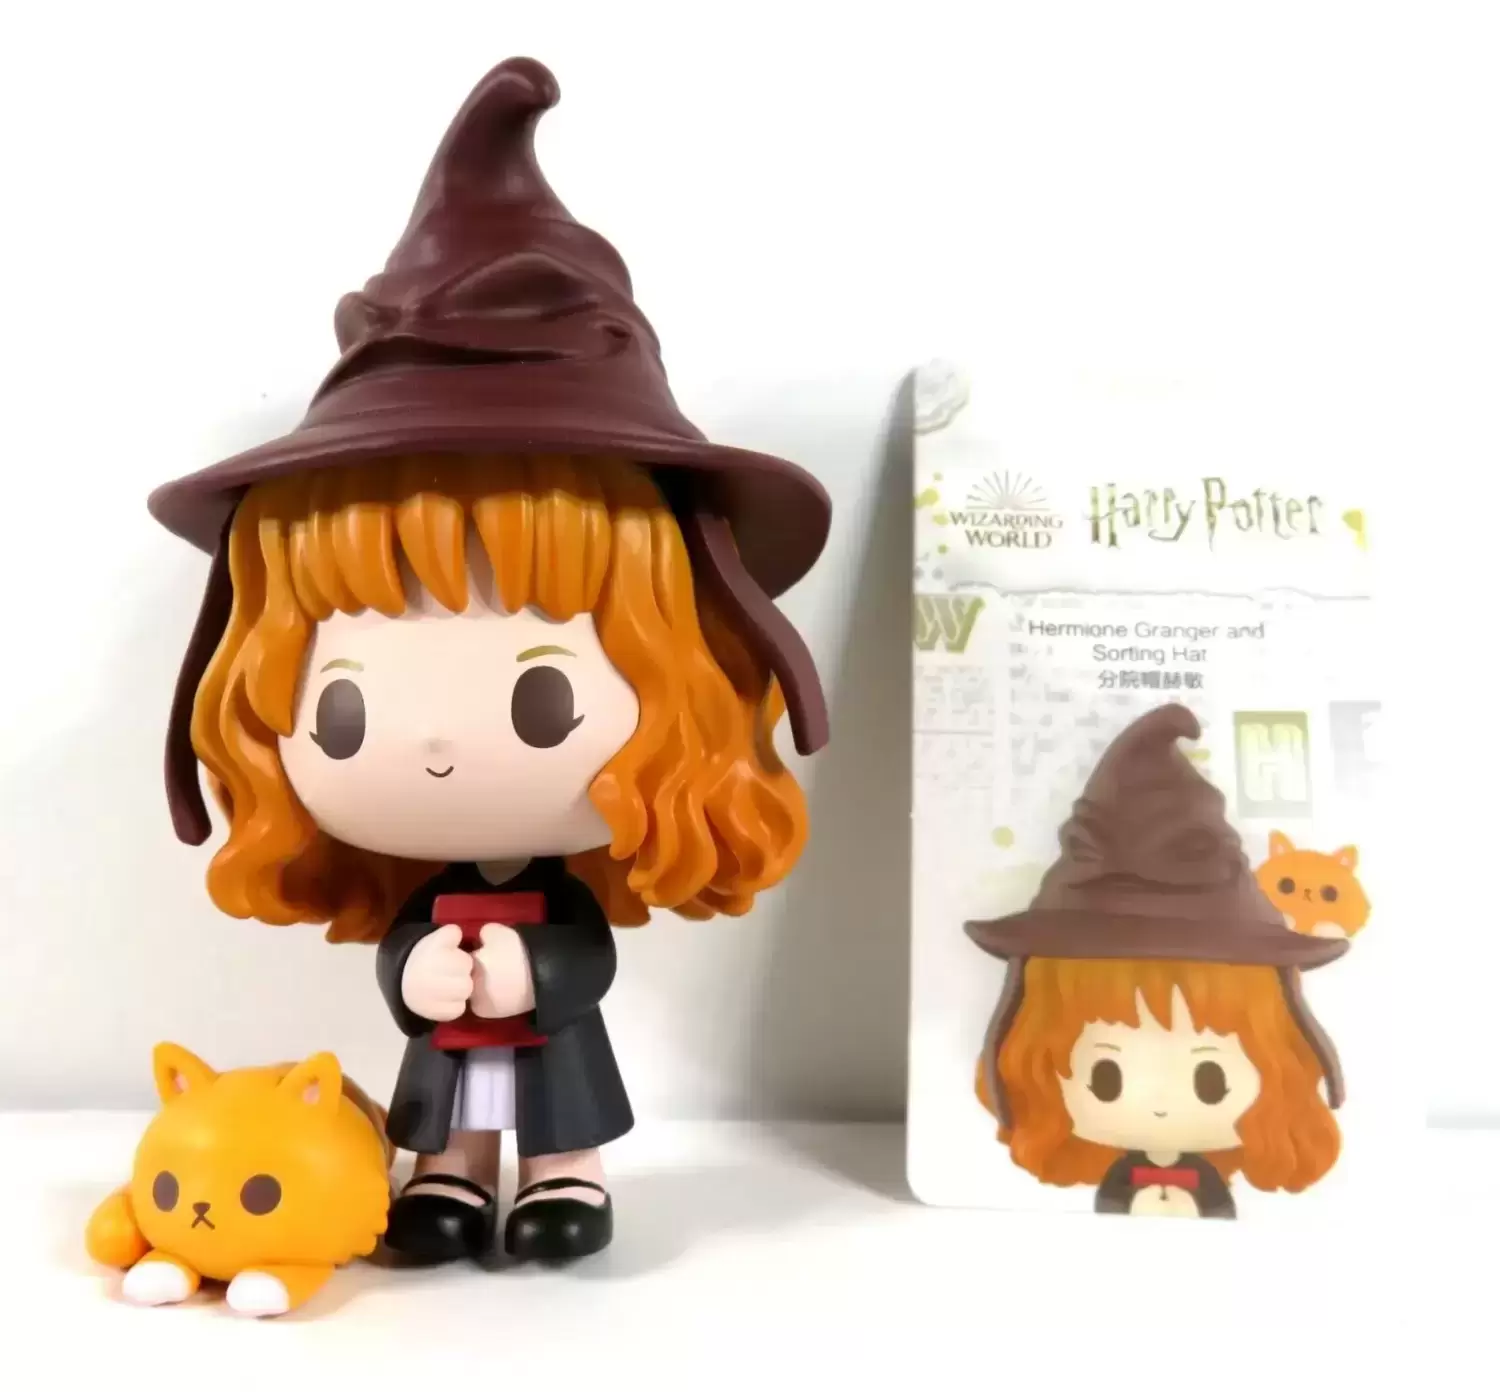 Harry Potter - Hermione Granger And Sorting Hat